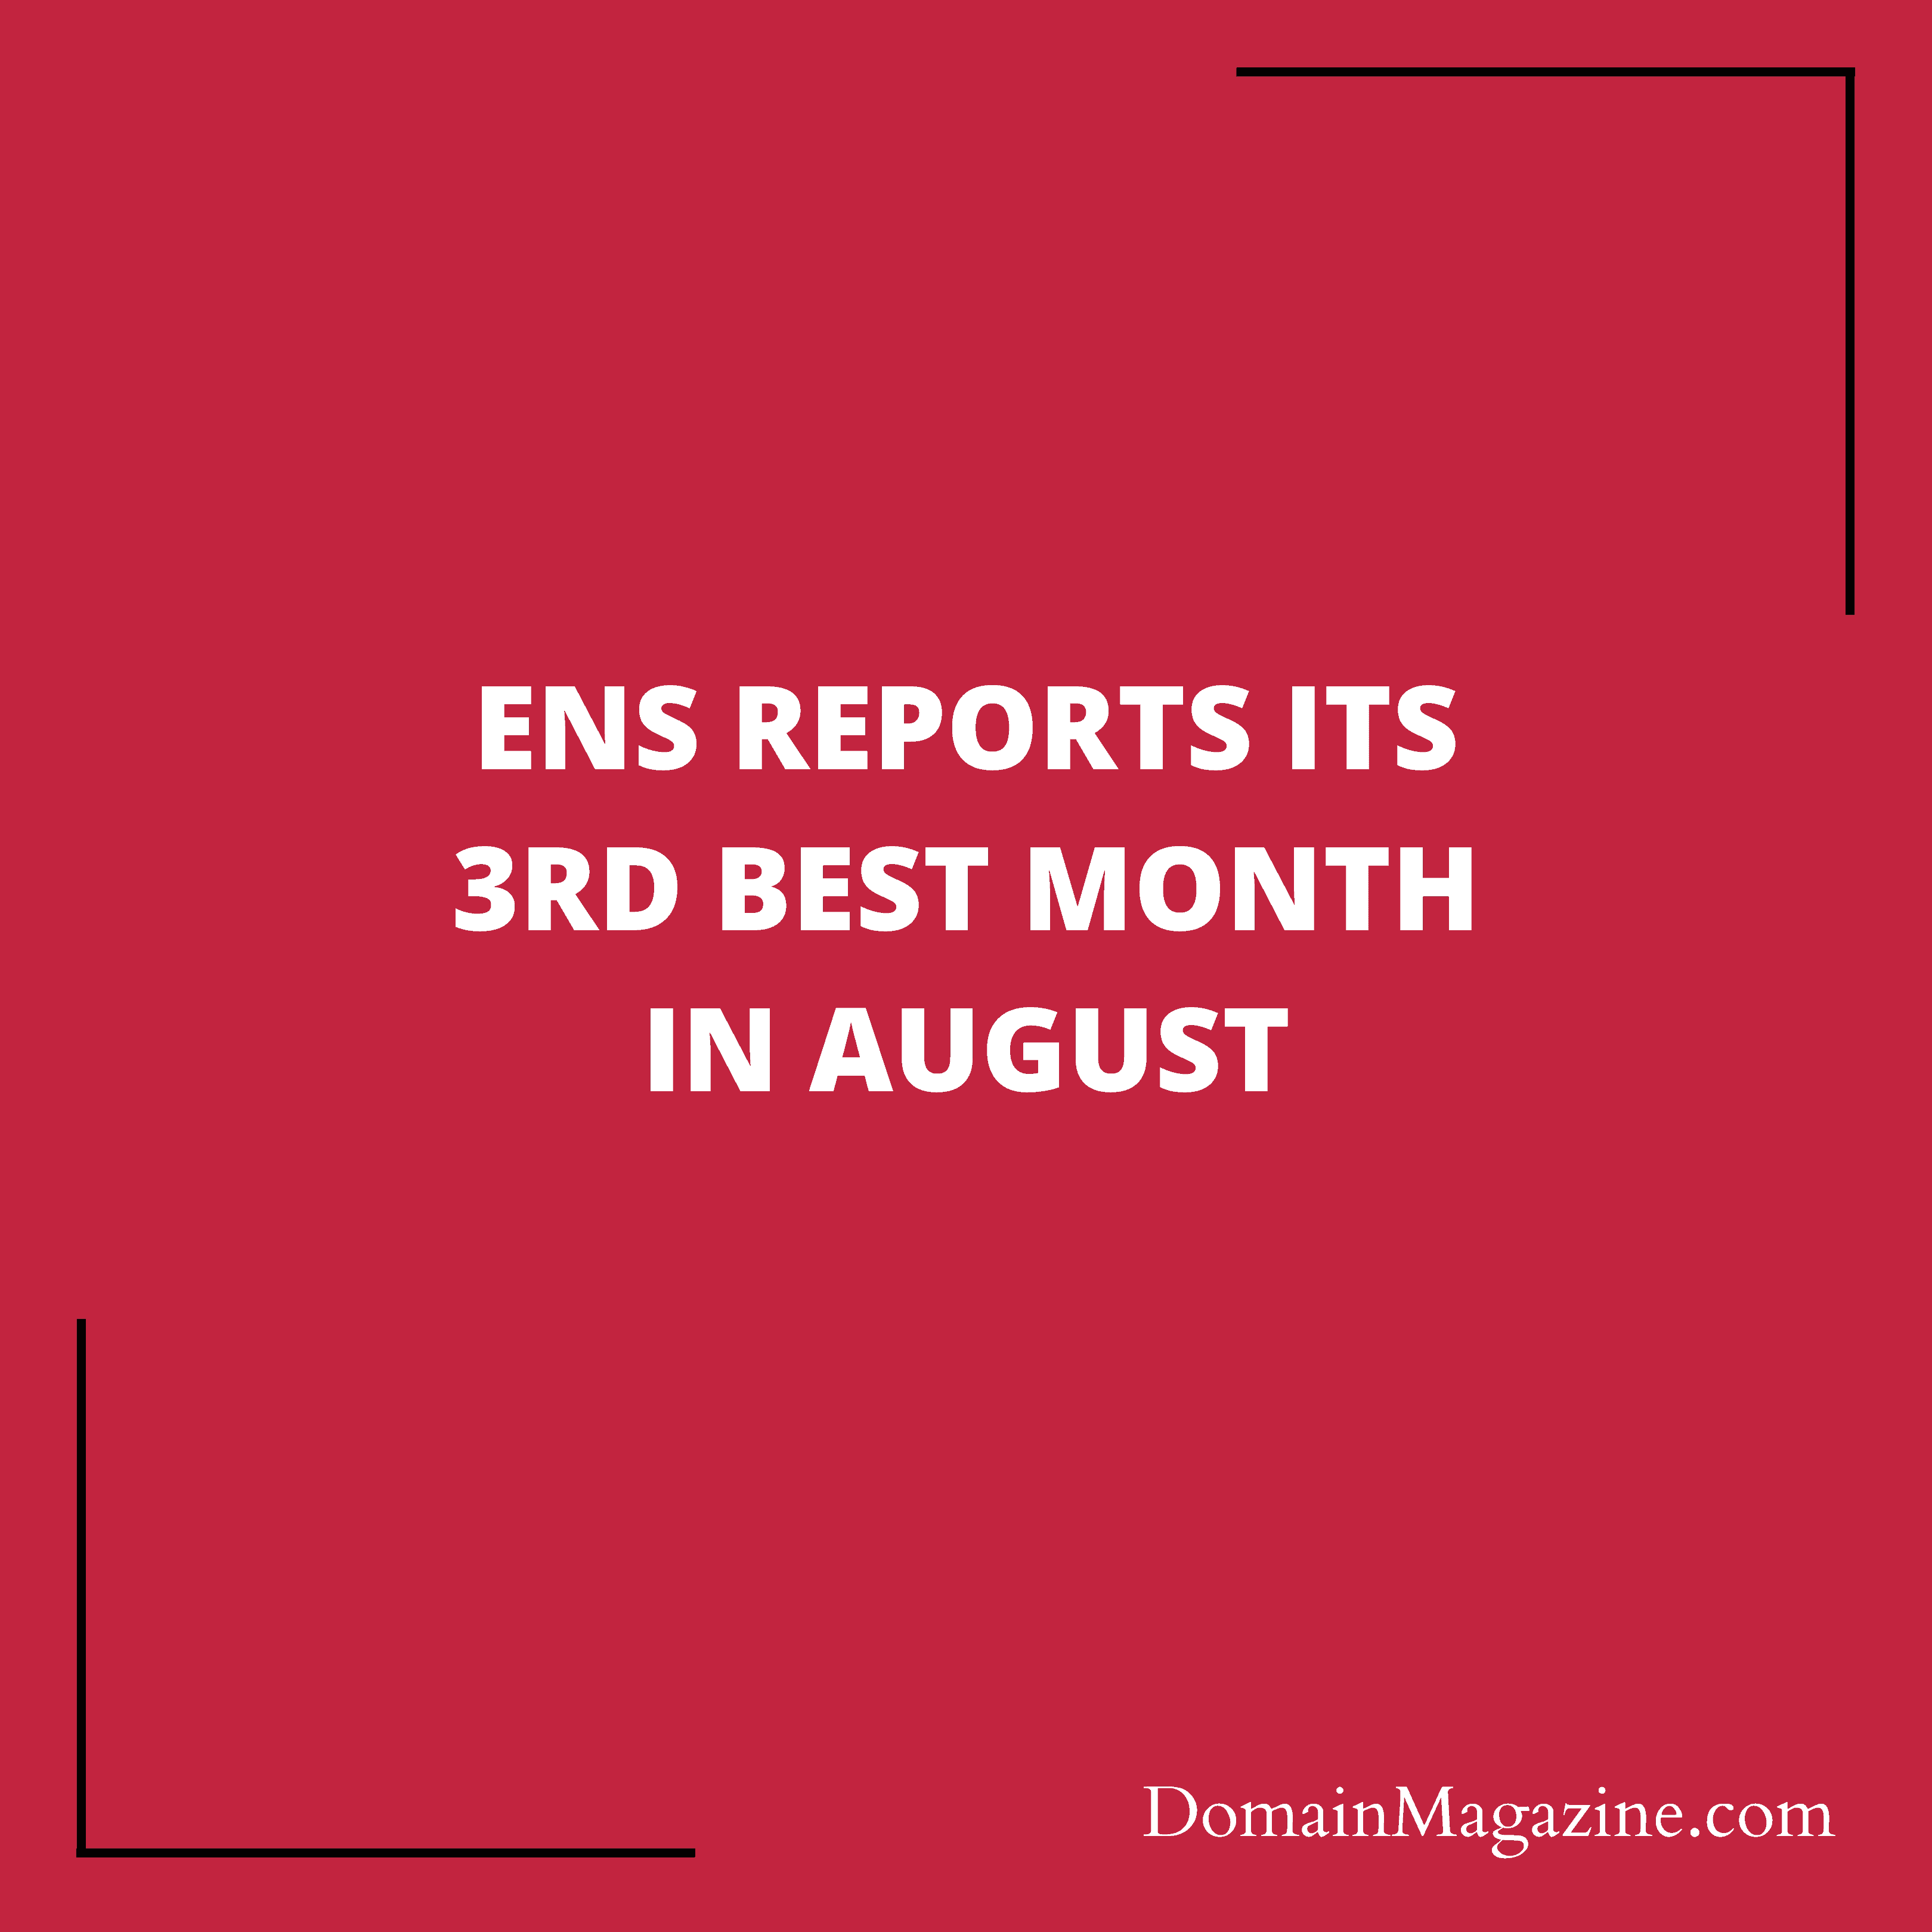 ENS reports its 3rd best month in August